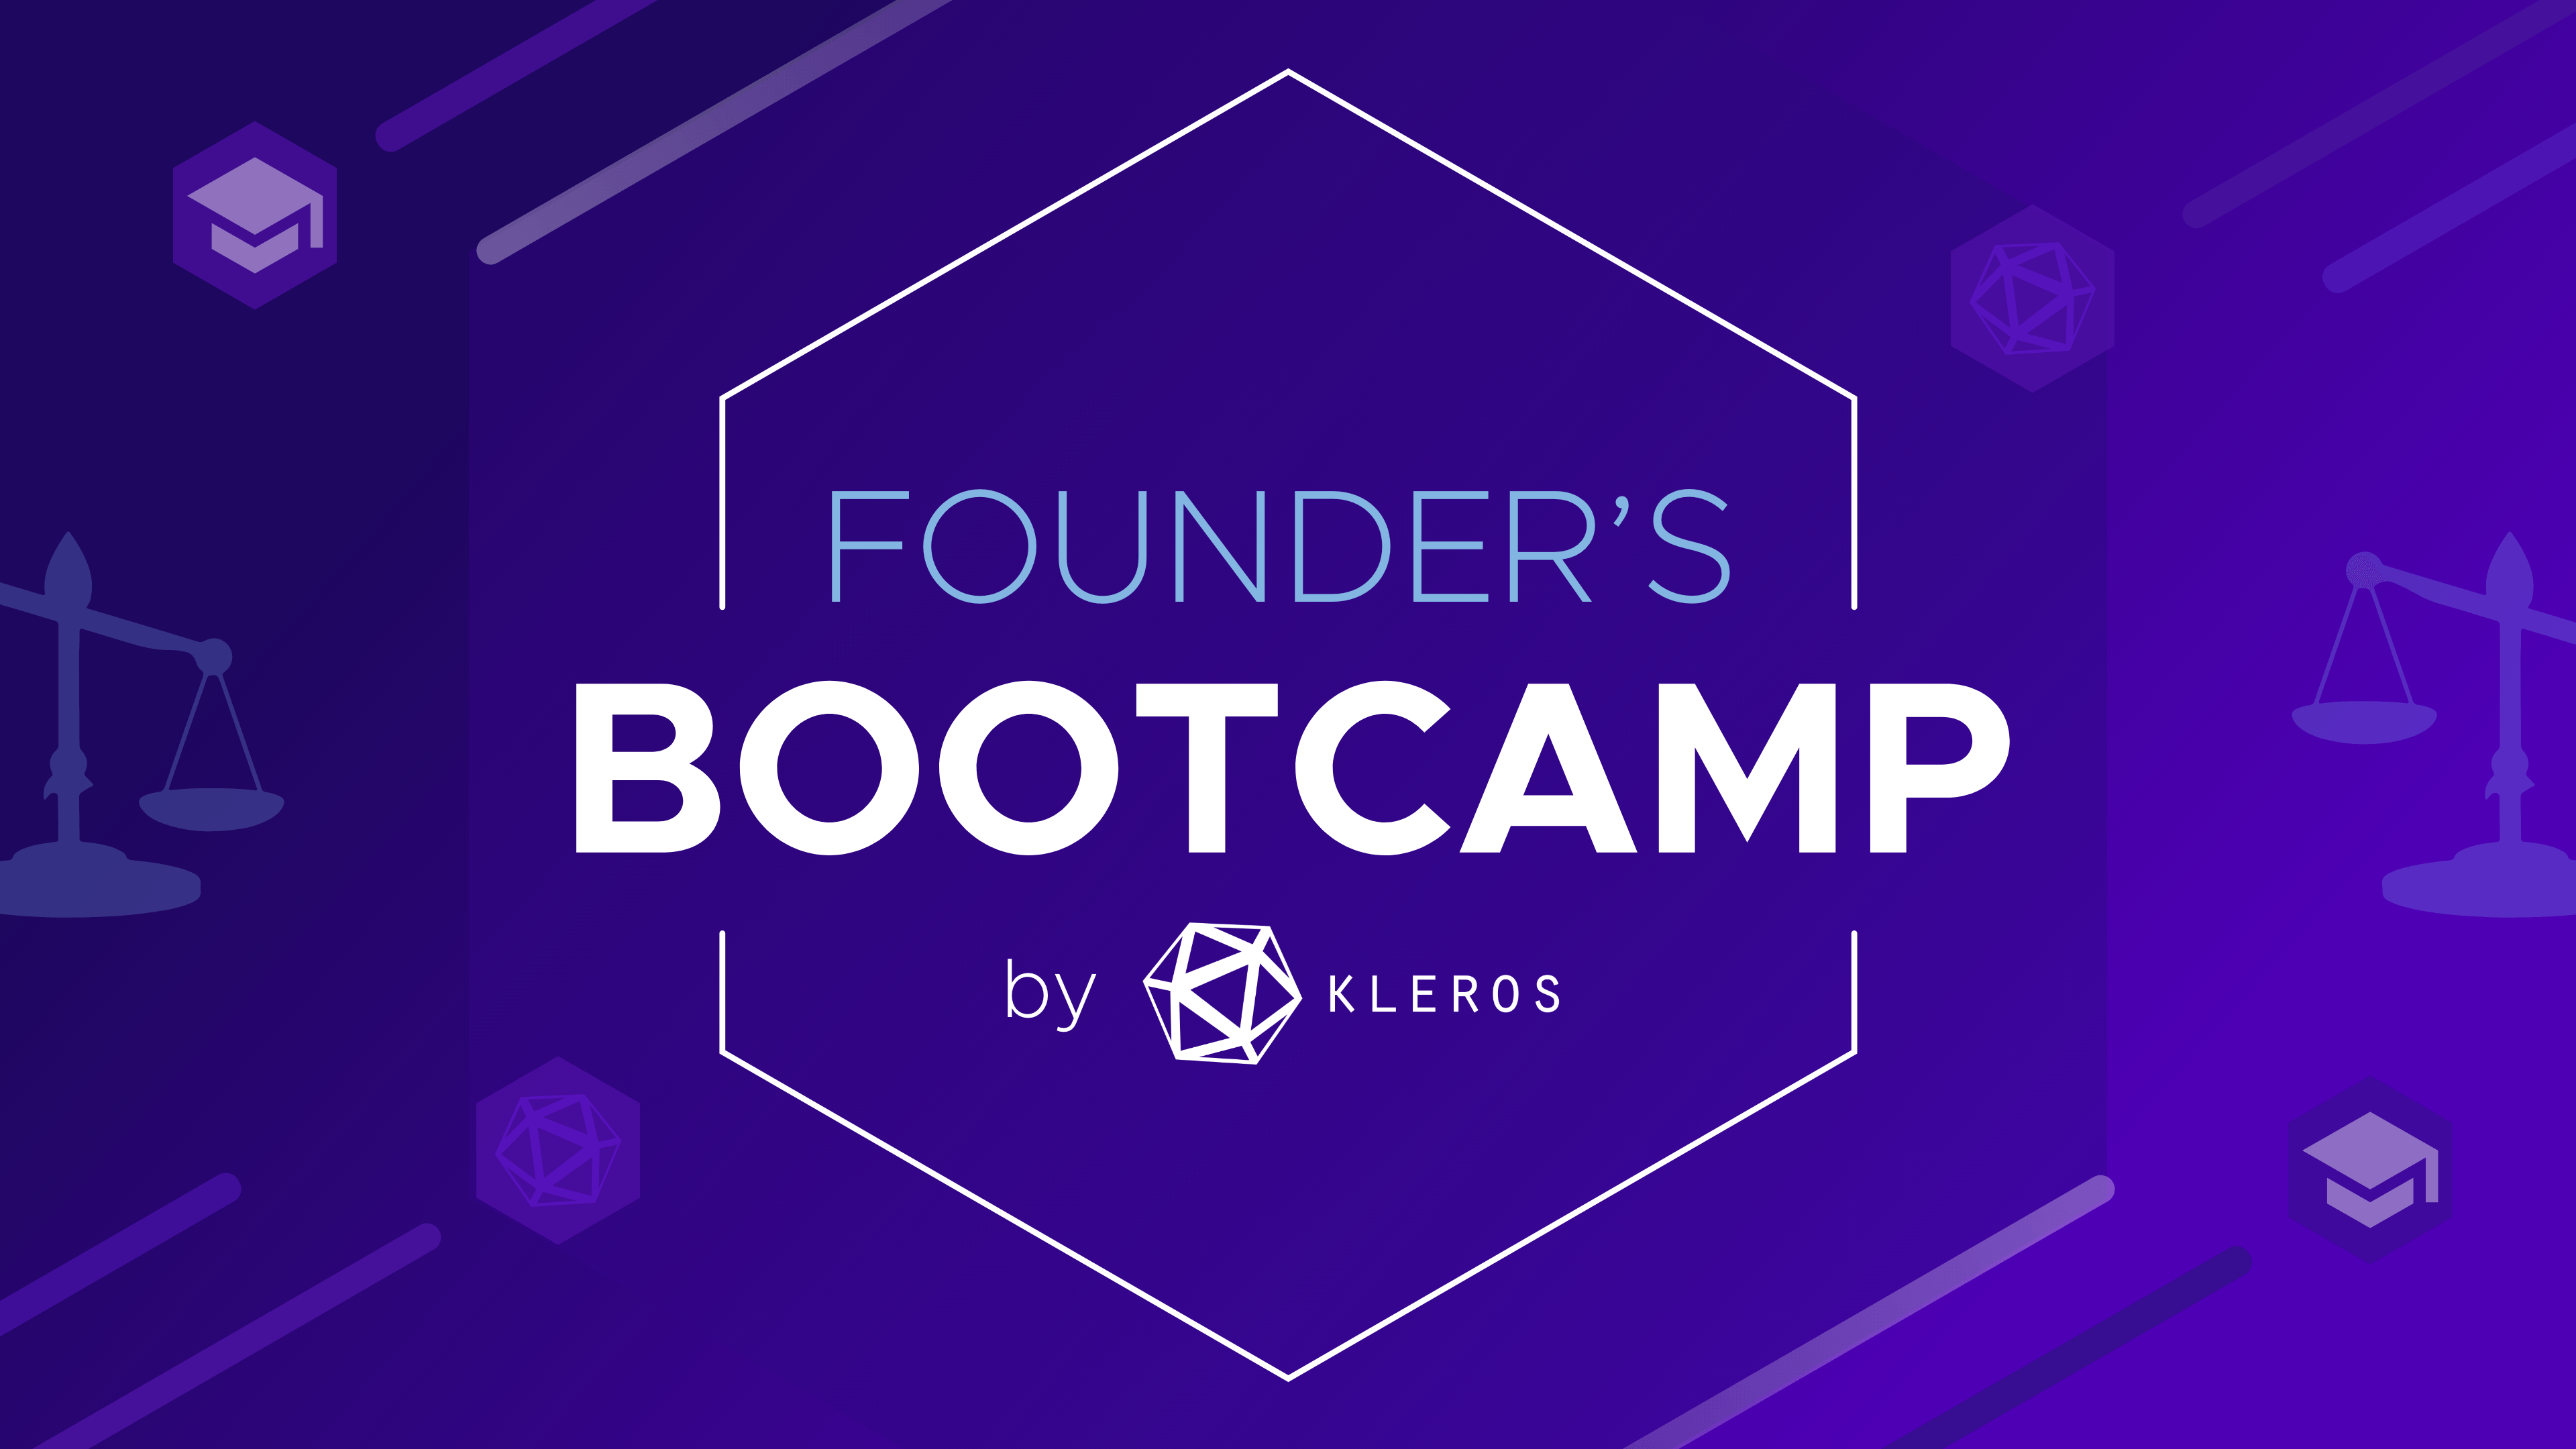 The Founder’s Bootcamp by Kleros - Join the Kleros World